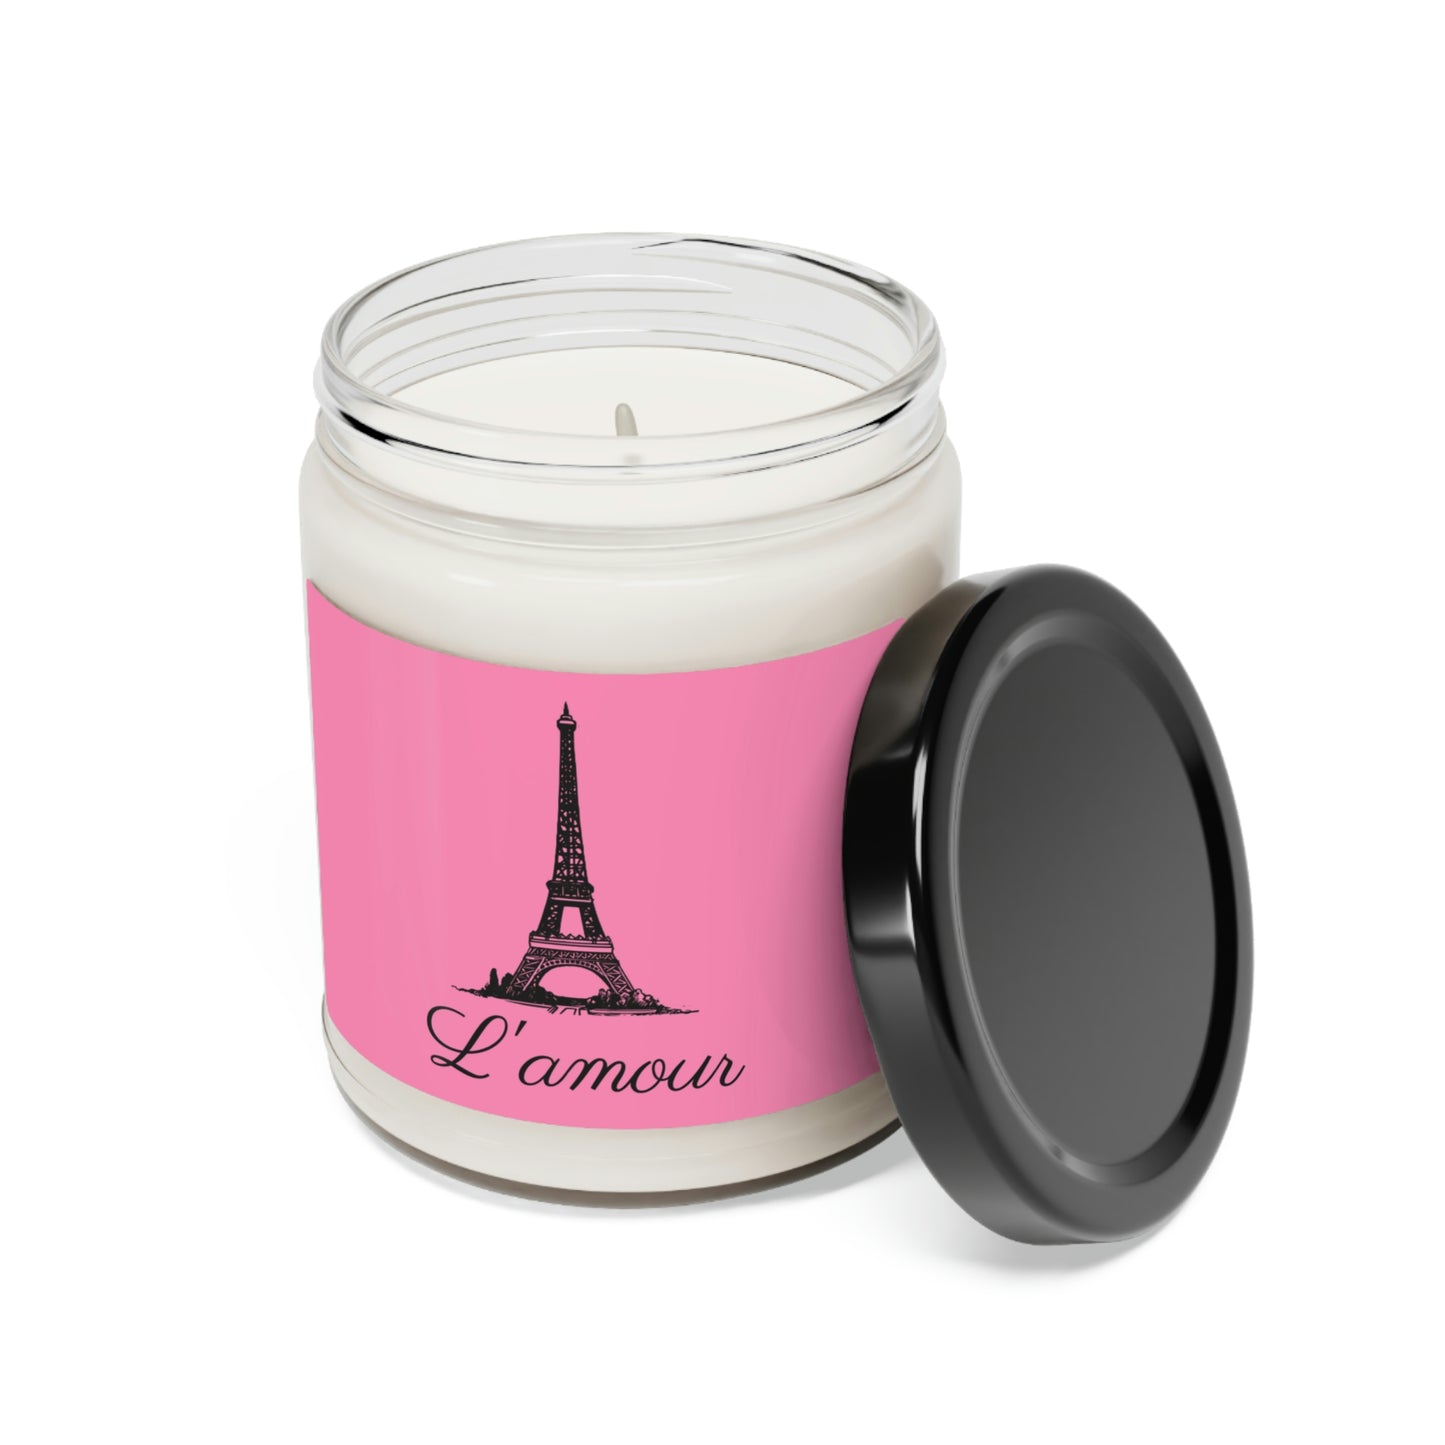 L'amour Scented Soy Candle, 9oz